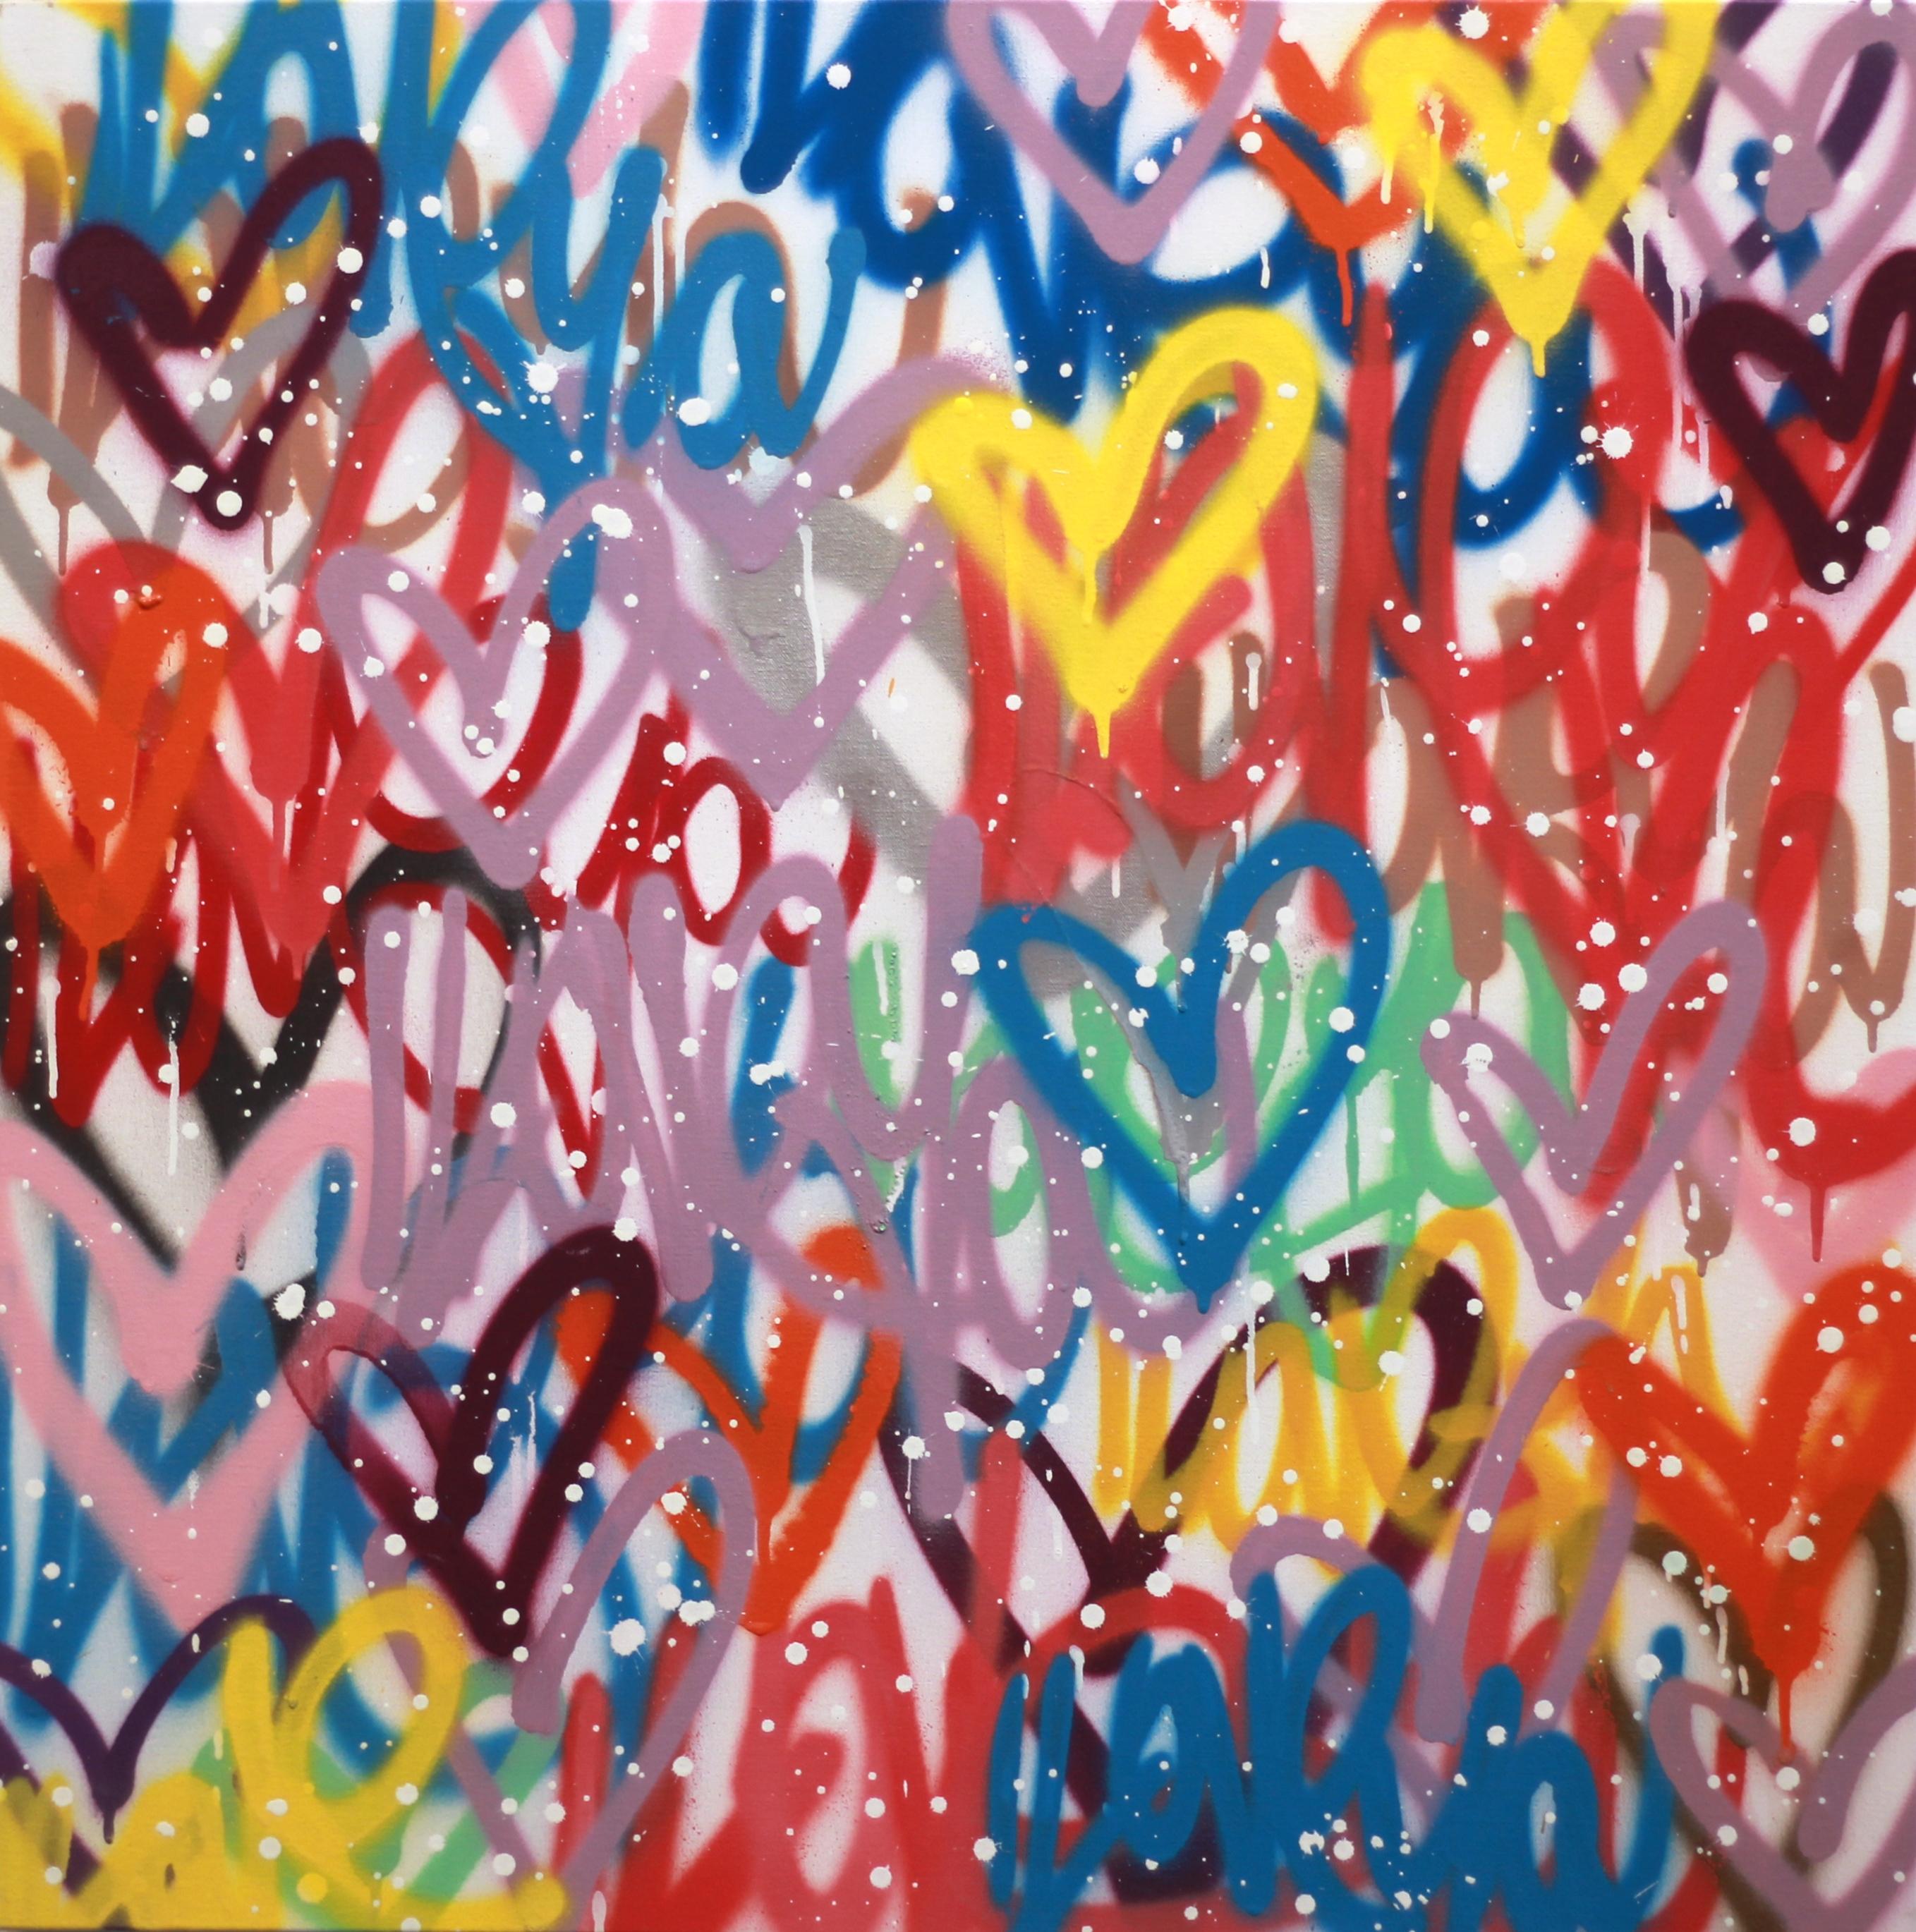 Warm Summer Love - Mixed Media Art by Amber Goldhammer